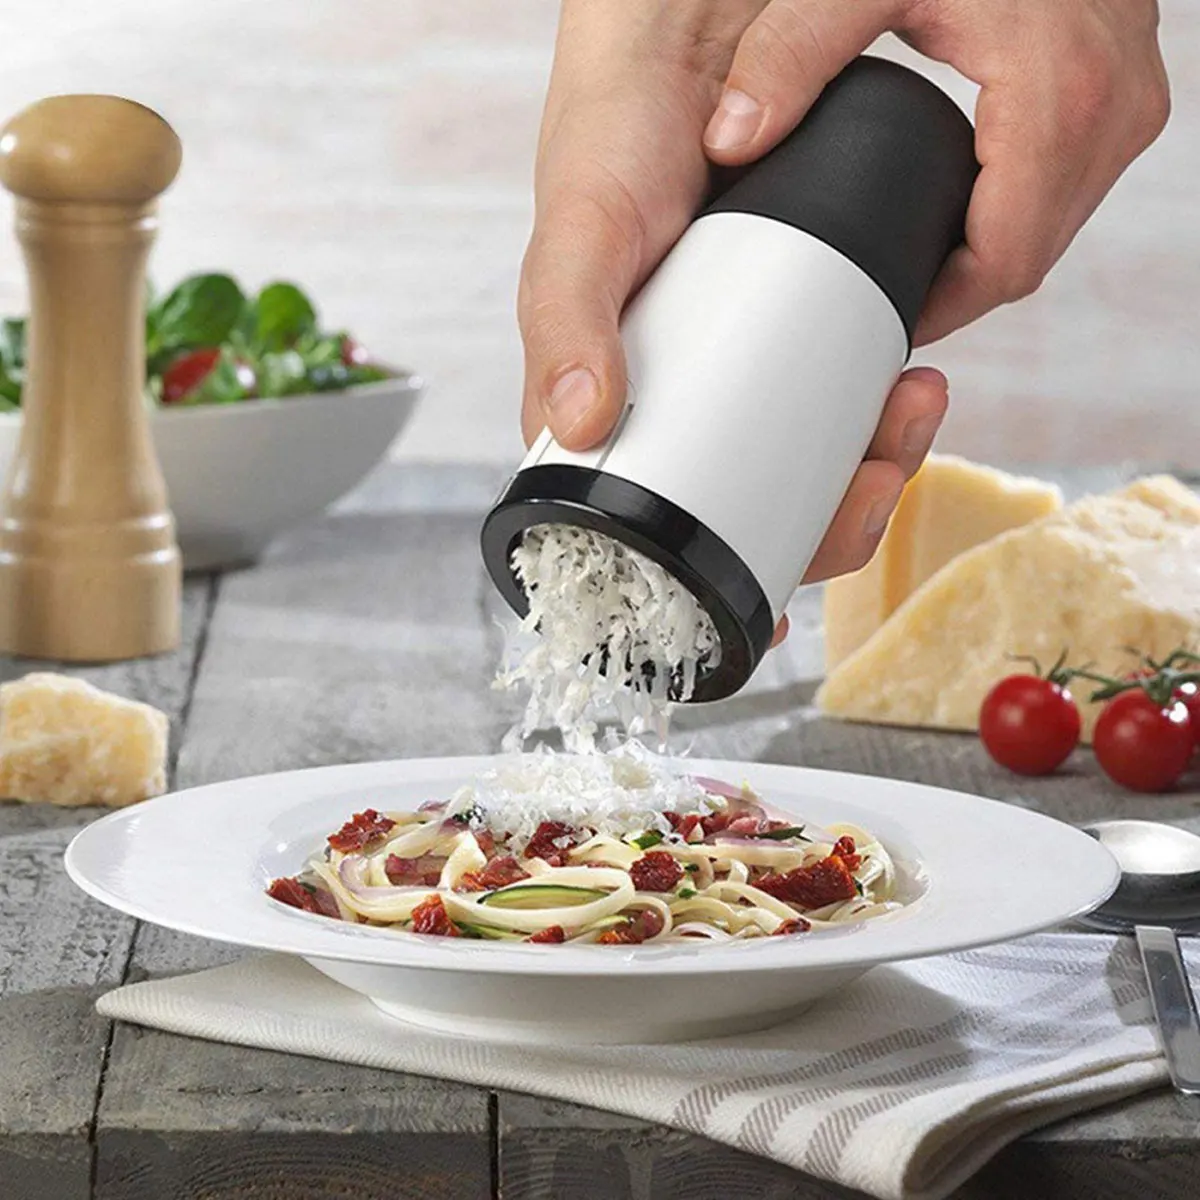 4 In 1 Handheld Drum Grater Manual Rotary Cheese Grater Multifunctional  Food Grater Stainless Steel for Parmesan Cheese Garlic - AliExpress